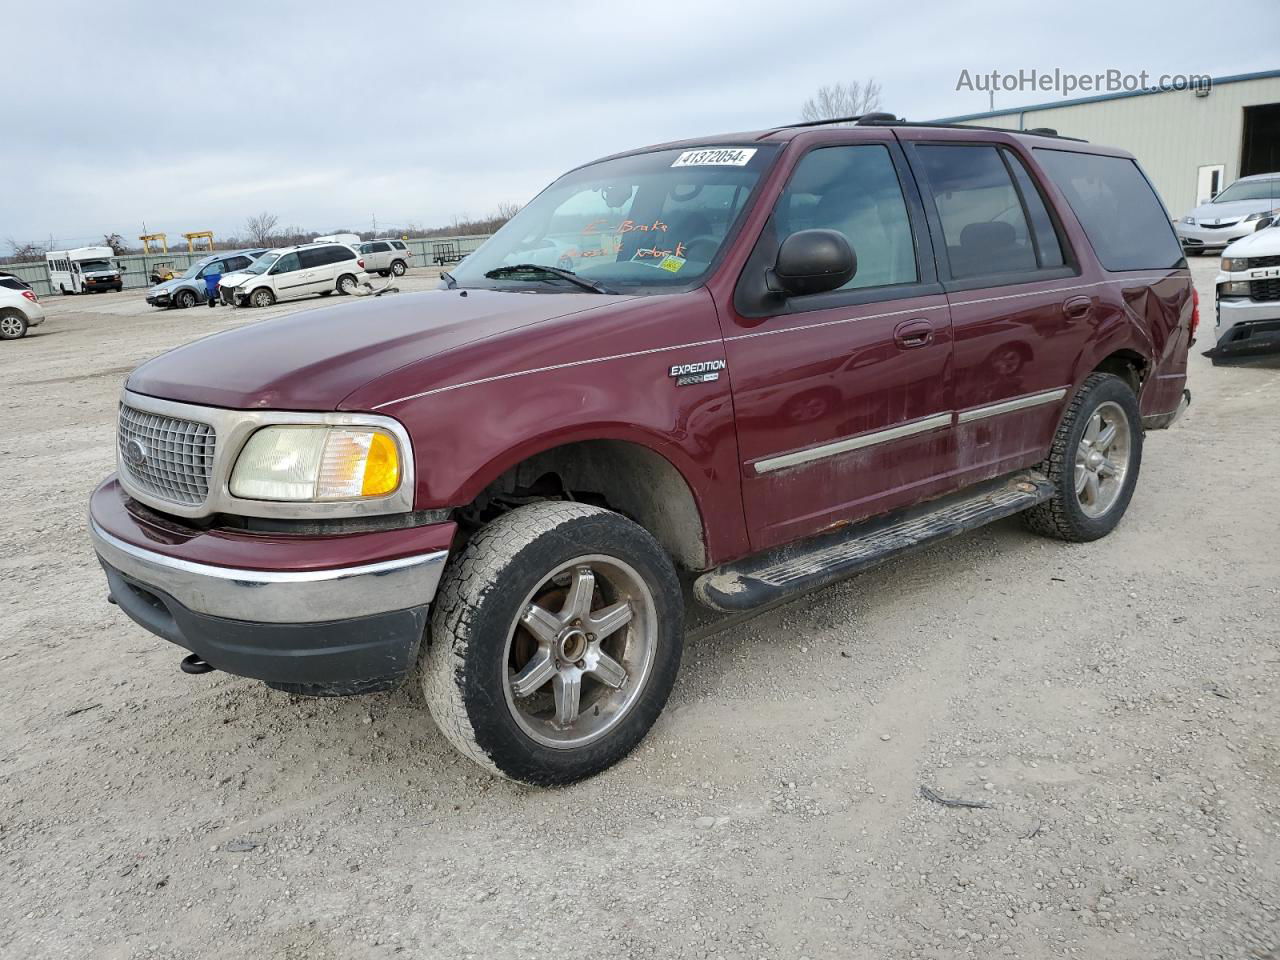 2000 Ford Expedition Xlt Maroon vin: 1FMPU16L6YLA11858